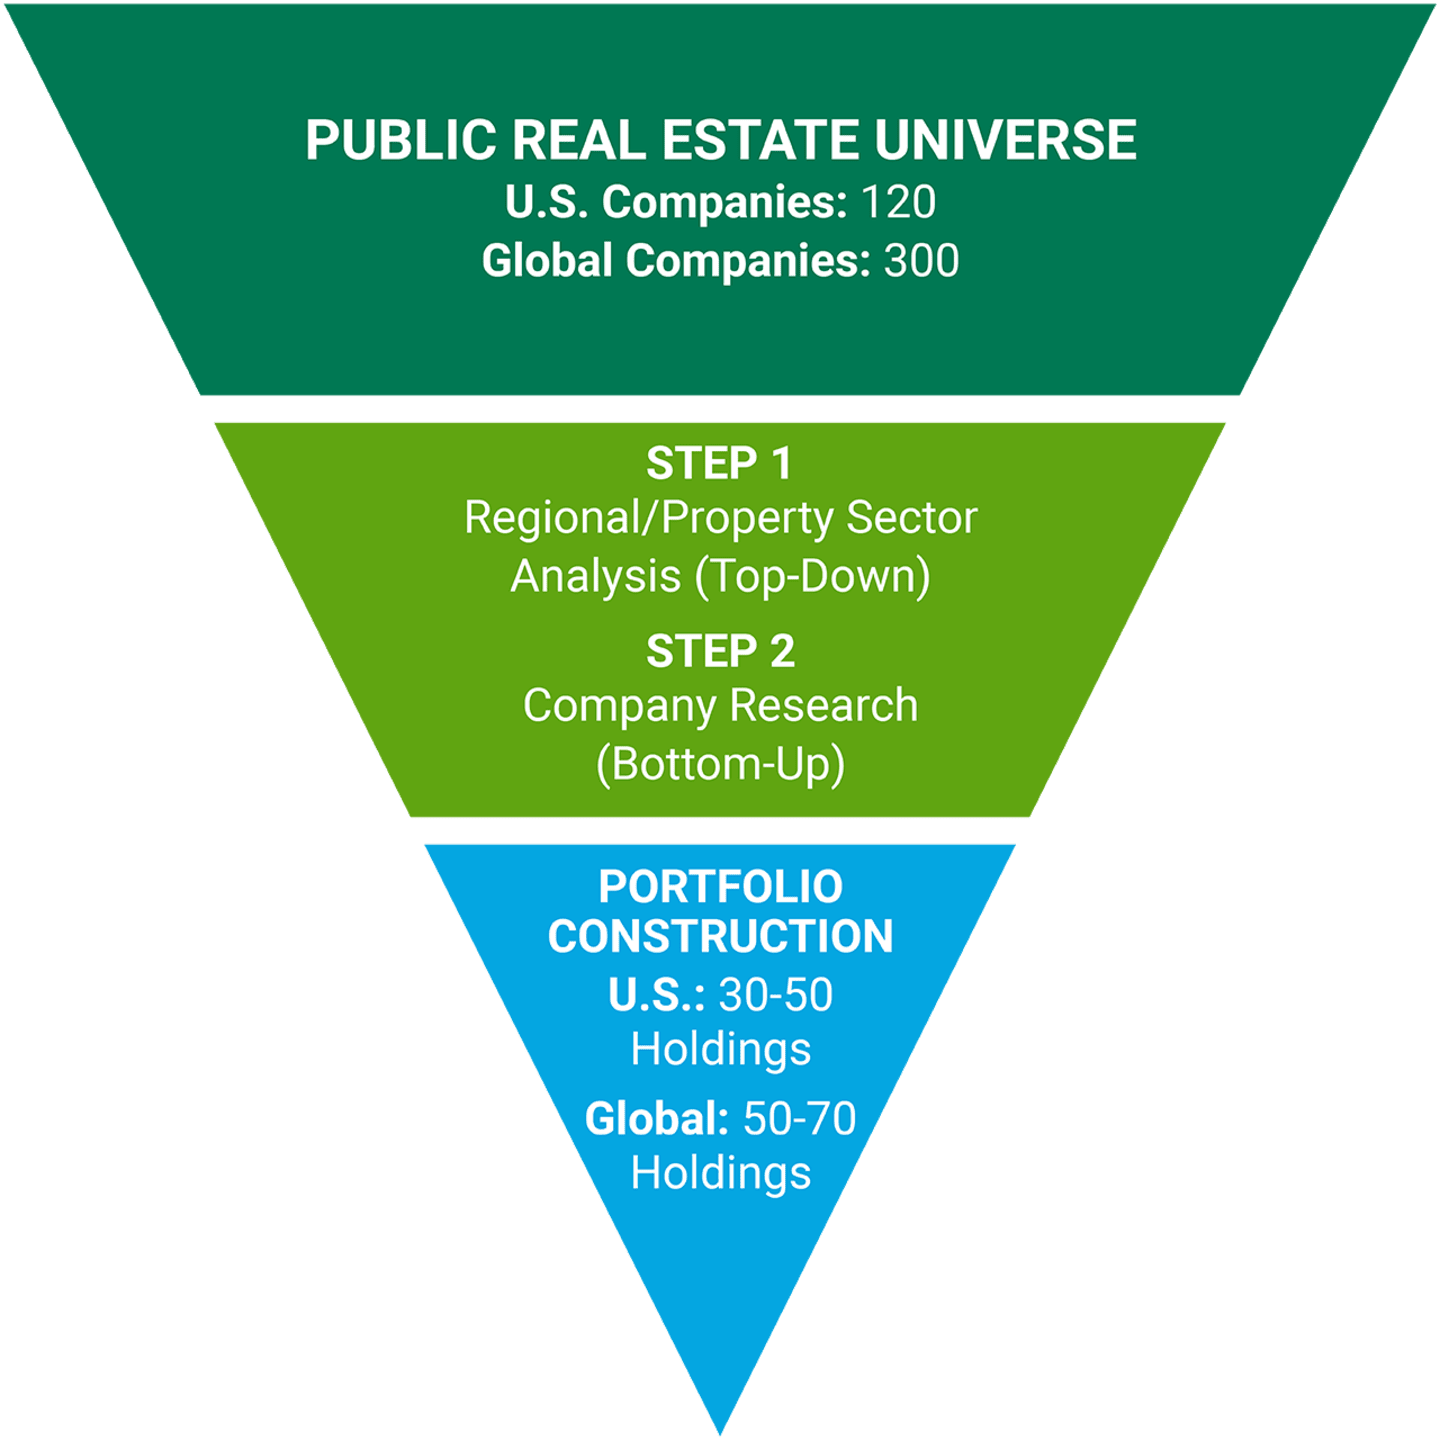 Public Real Estate Universe: US Companies, 120; Global Companies, 300. Step 1: Regional/Property Sector Analysis (Top-Down). Step 2: Company Research (Bottom-Up). Portfolio Construction: US, 30-50 holdings; Global, 40-70 holdings. 